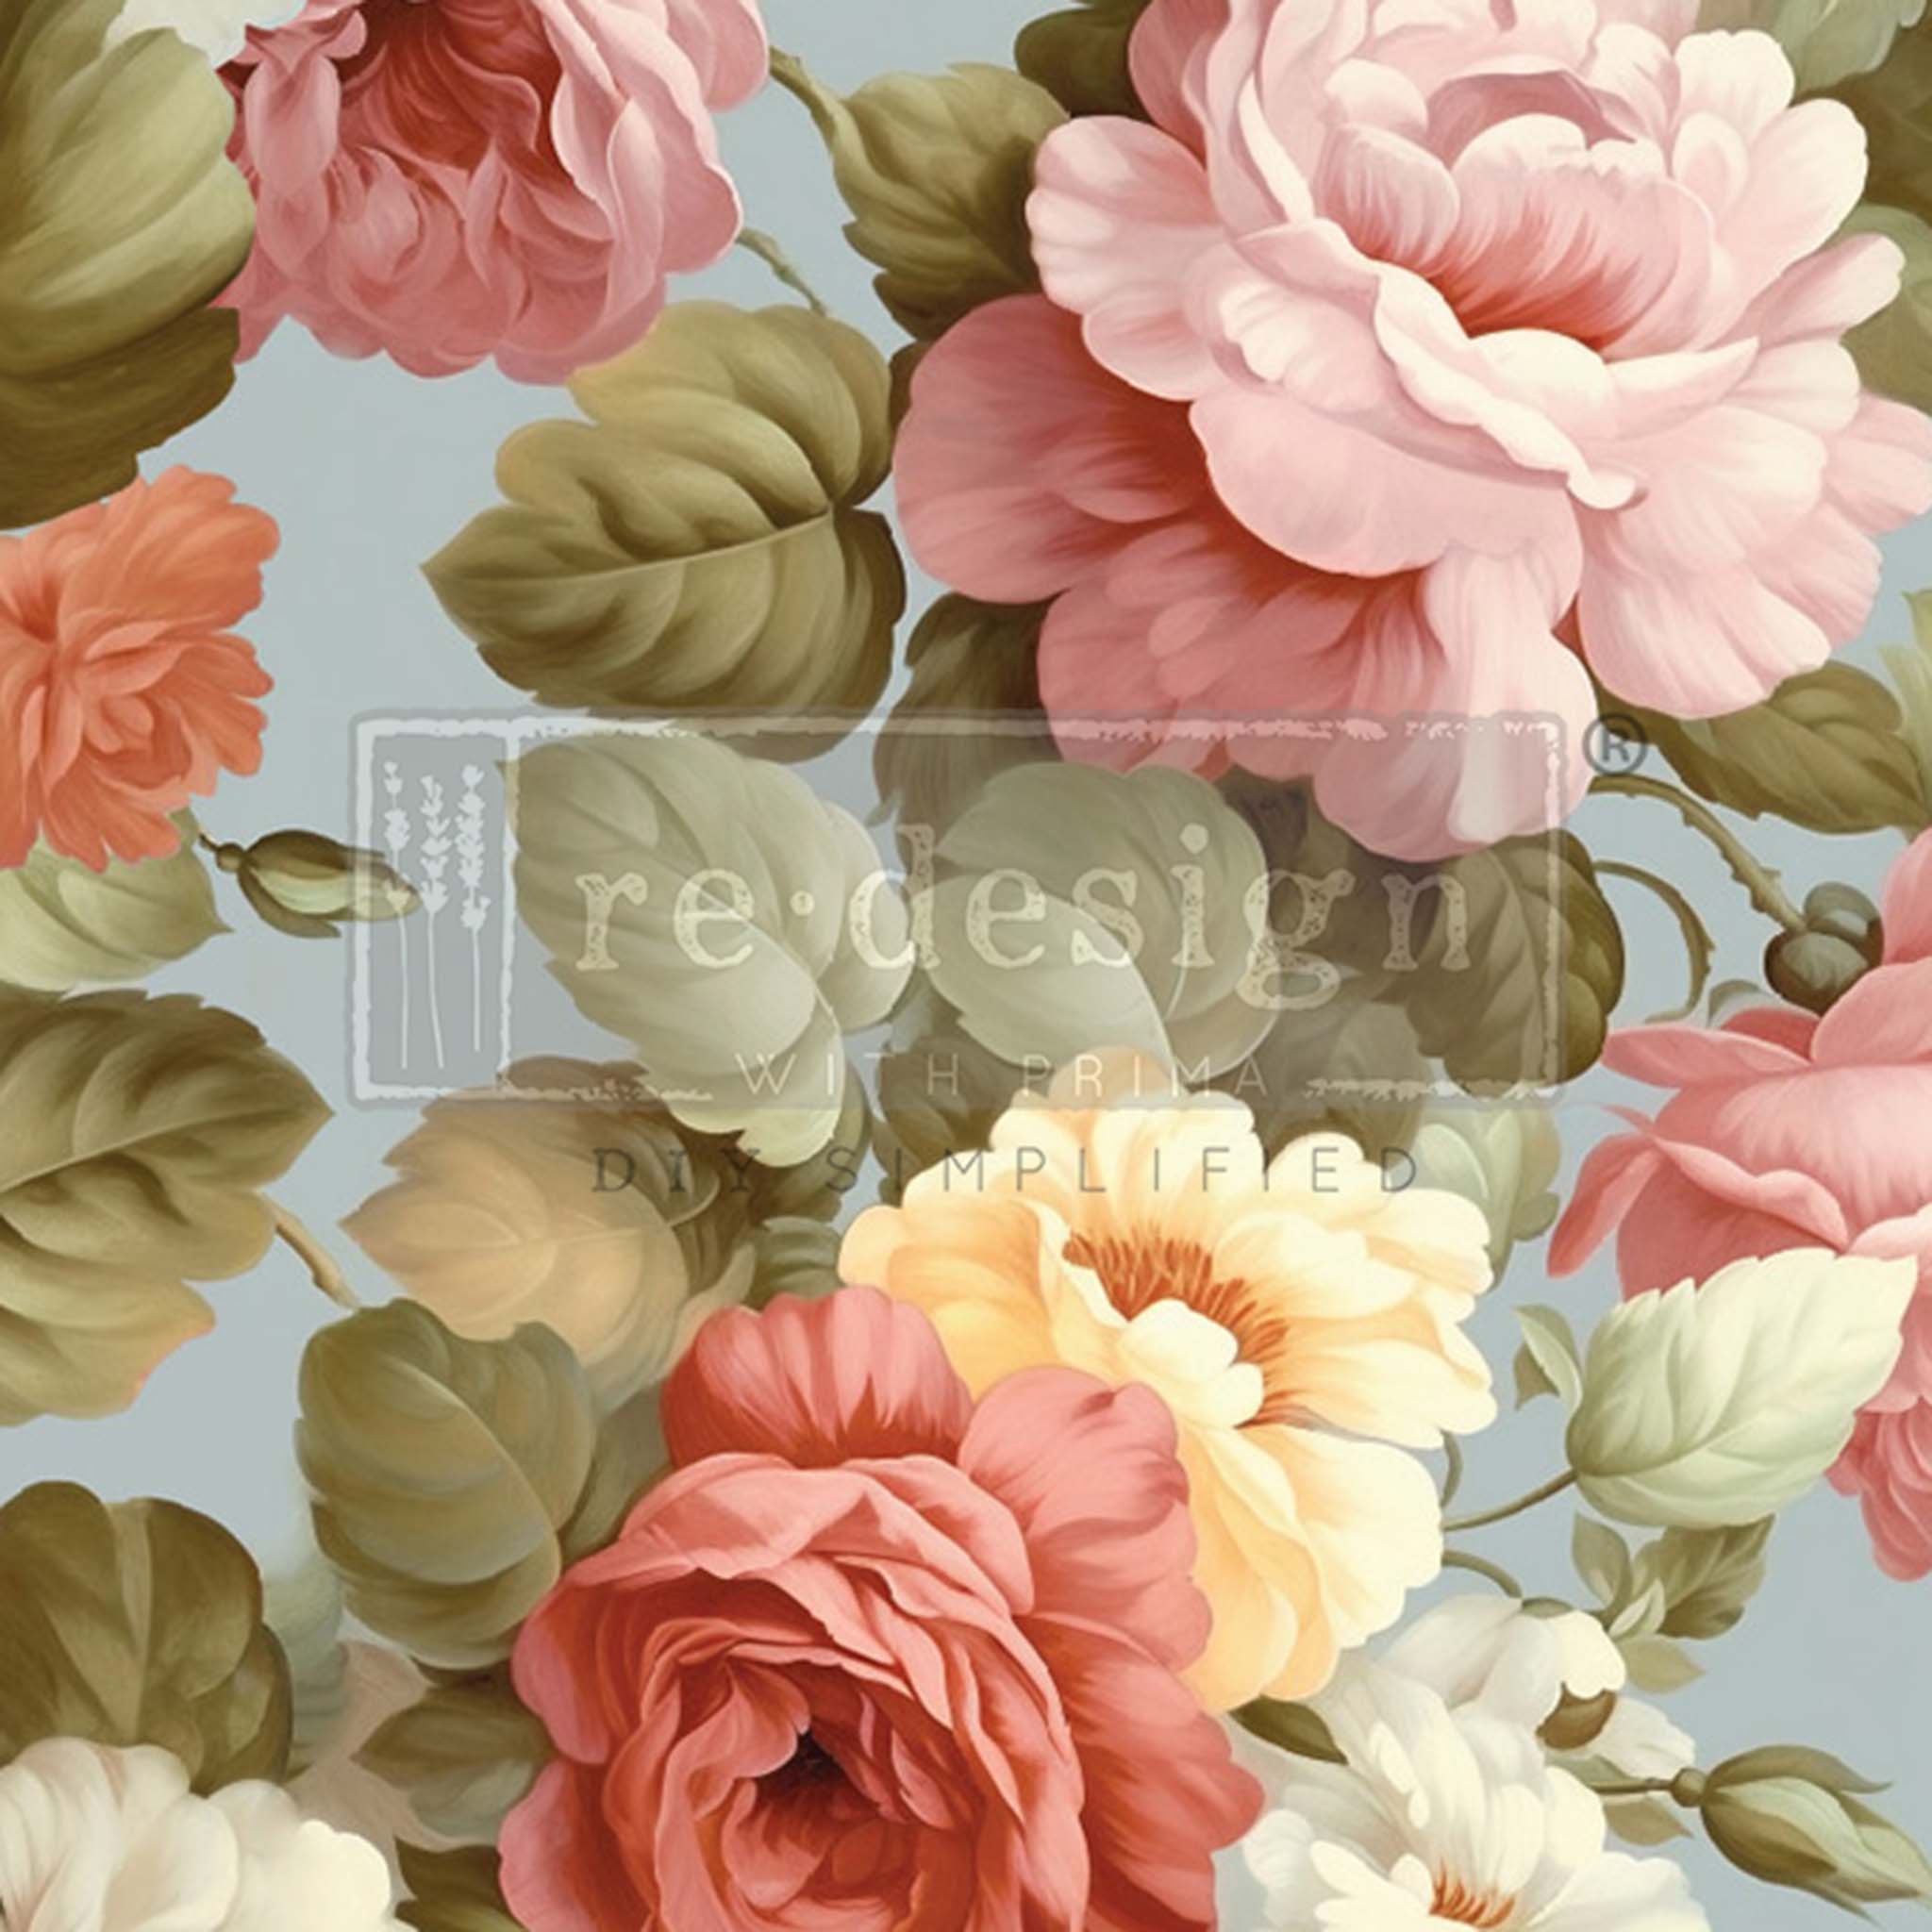 Close-up of an A1 fiber paper design featuring large mauve and cream colored roses on a soft blue background.